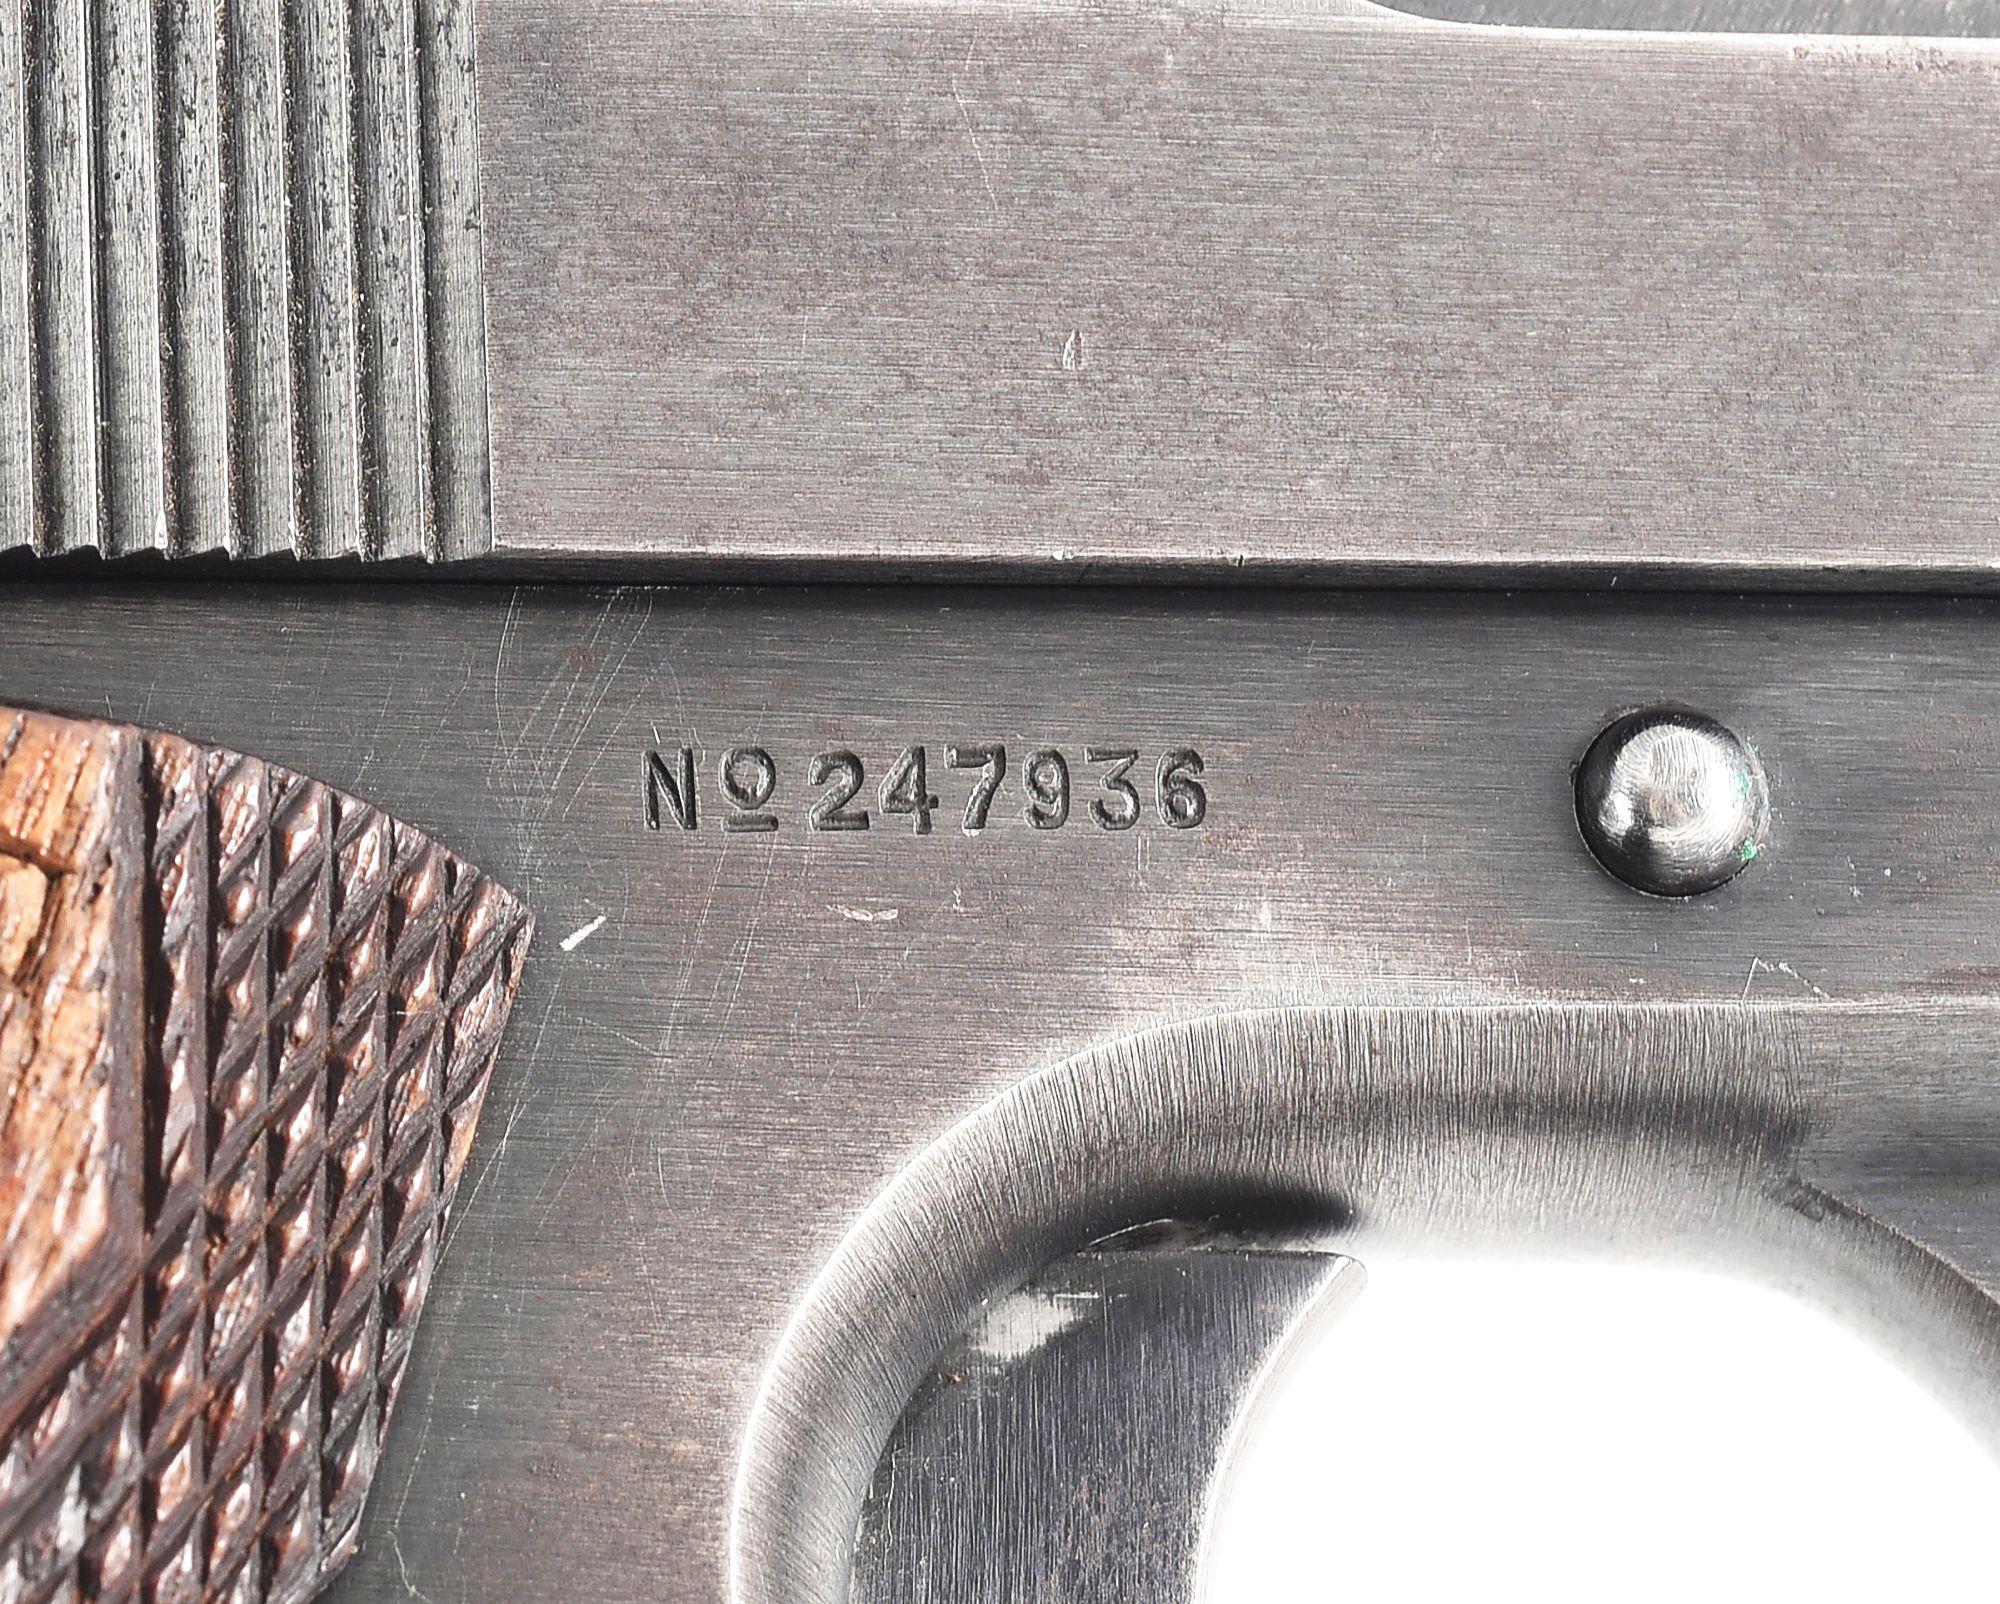 (C) COLT M1911 SEMI-AUTOMATIC PISTOL WITH RIA 1912 DATED HOLSTER (1918).